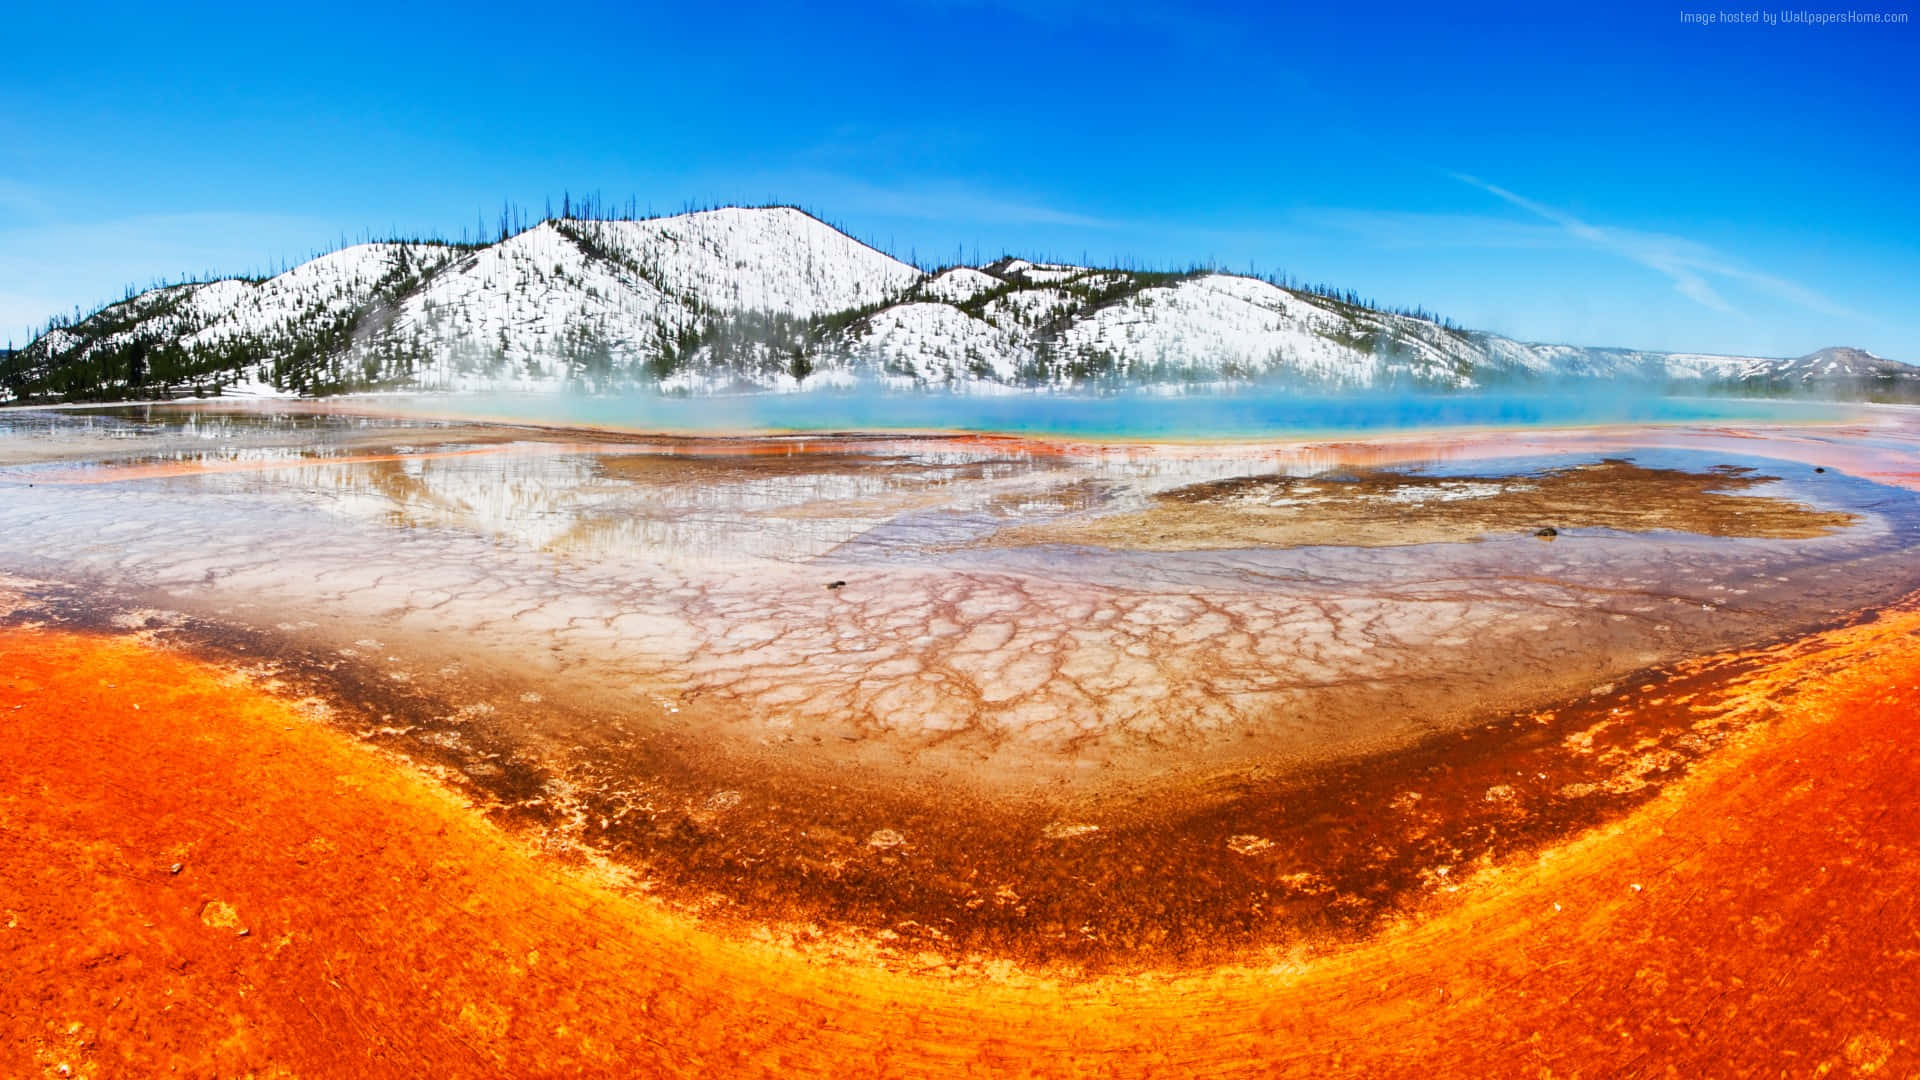 "Stay amazed by the wonders of nature in Yellowstone National Park" Wallpaper